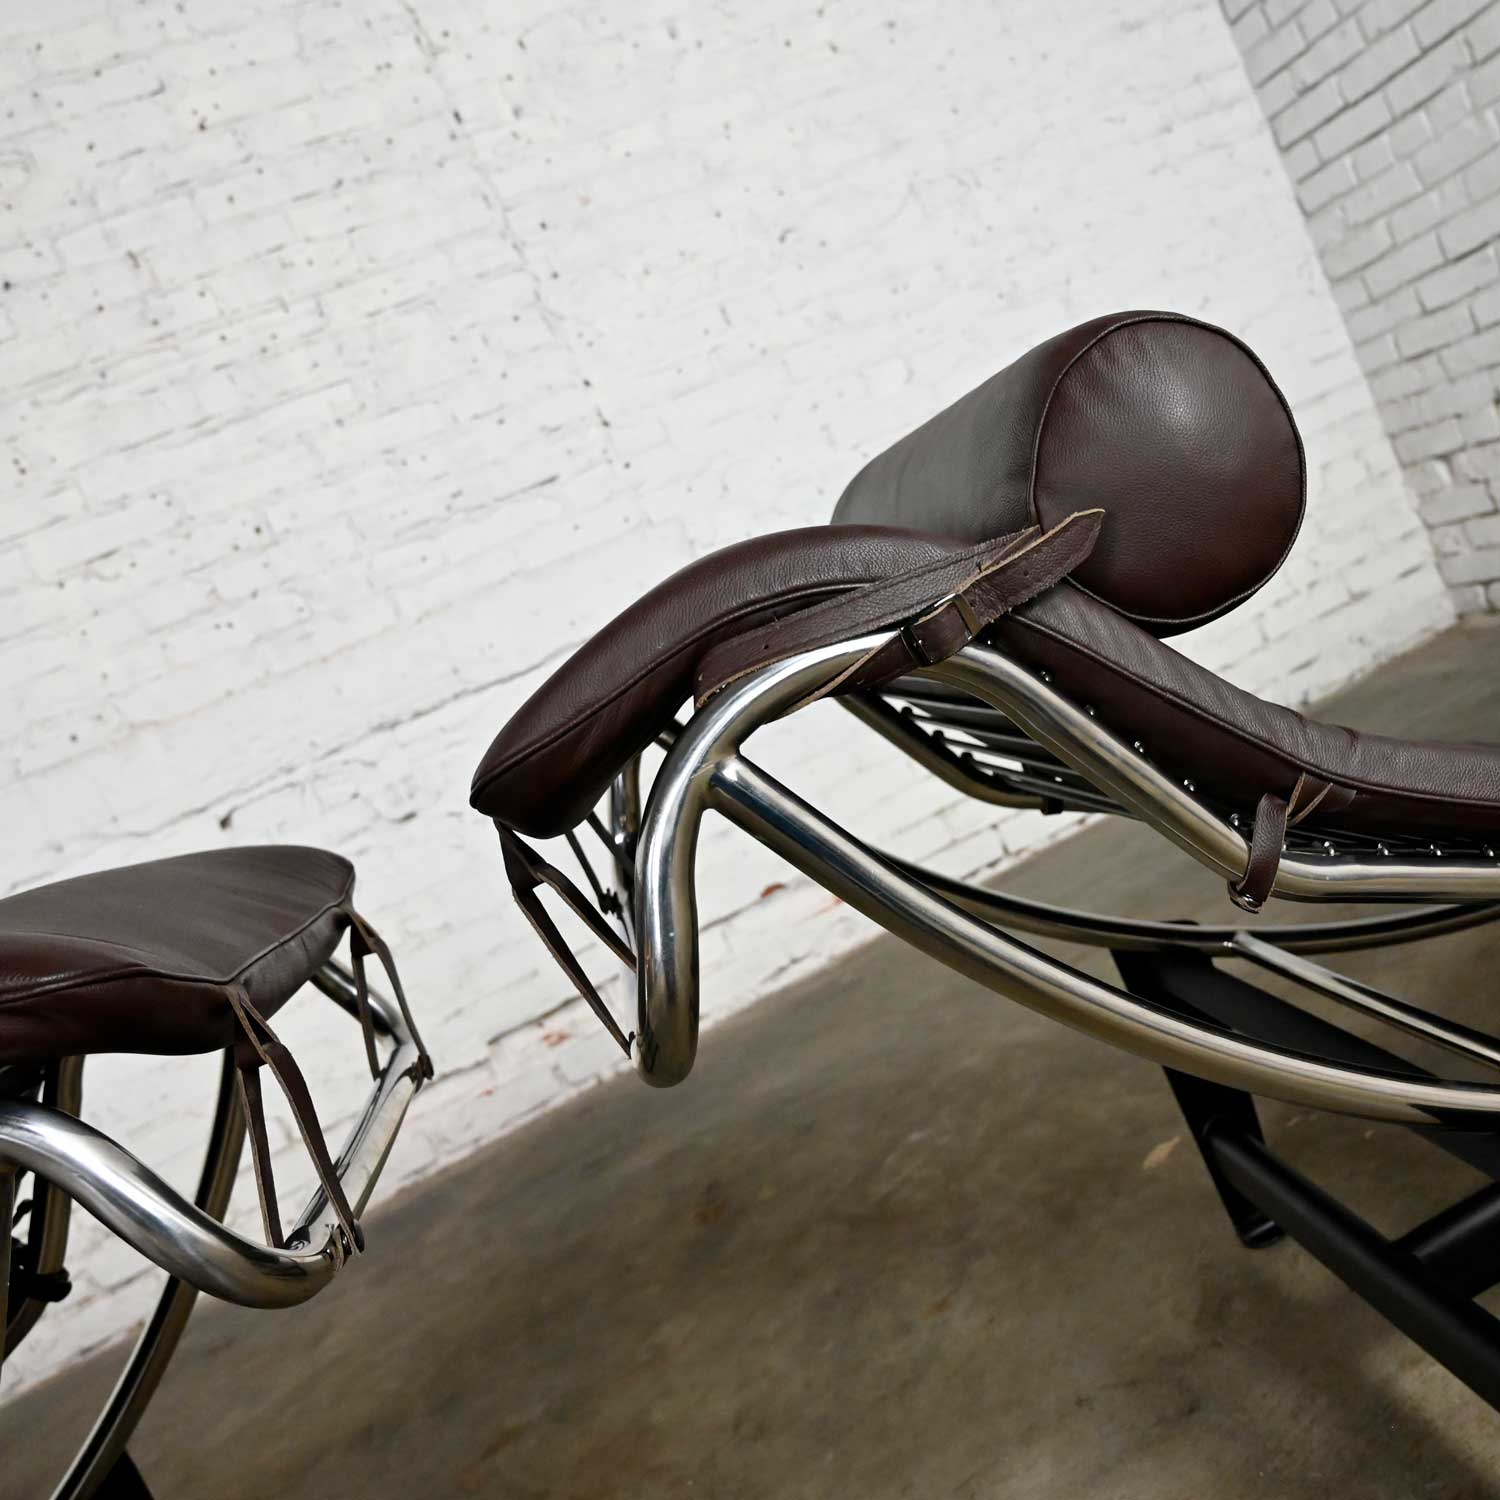 Pair Chaise Lounge Chairs Brown Leather & Chrome & Black Steel Bases Style of Le Corbusier LC4